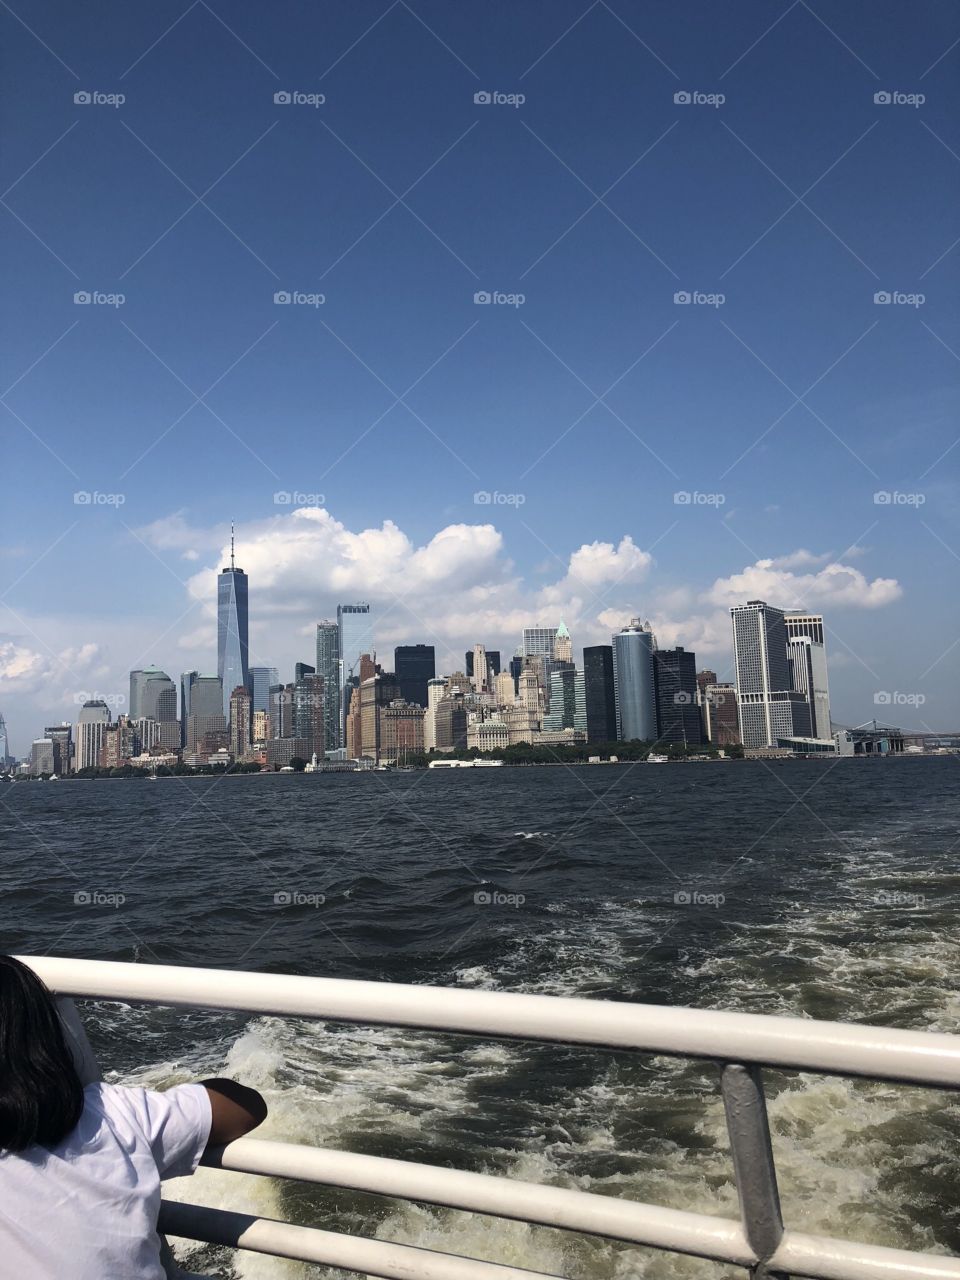 NYC From the Sea